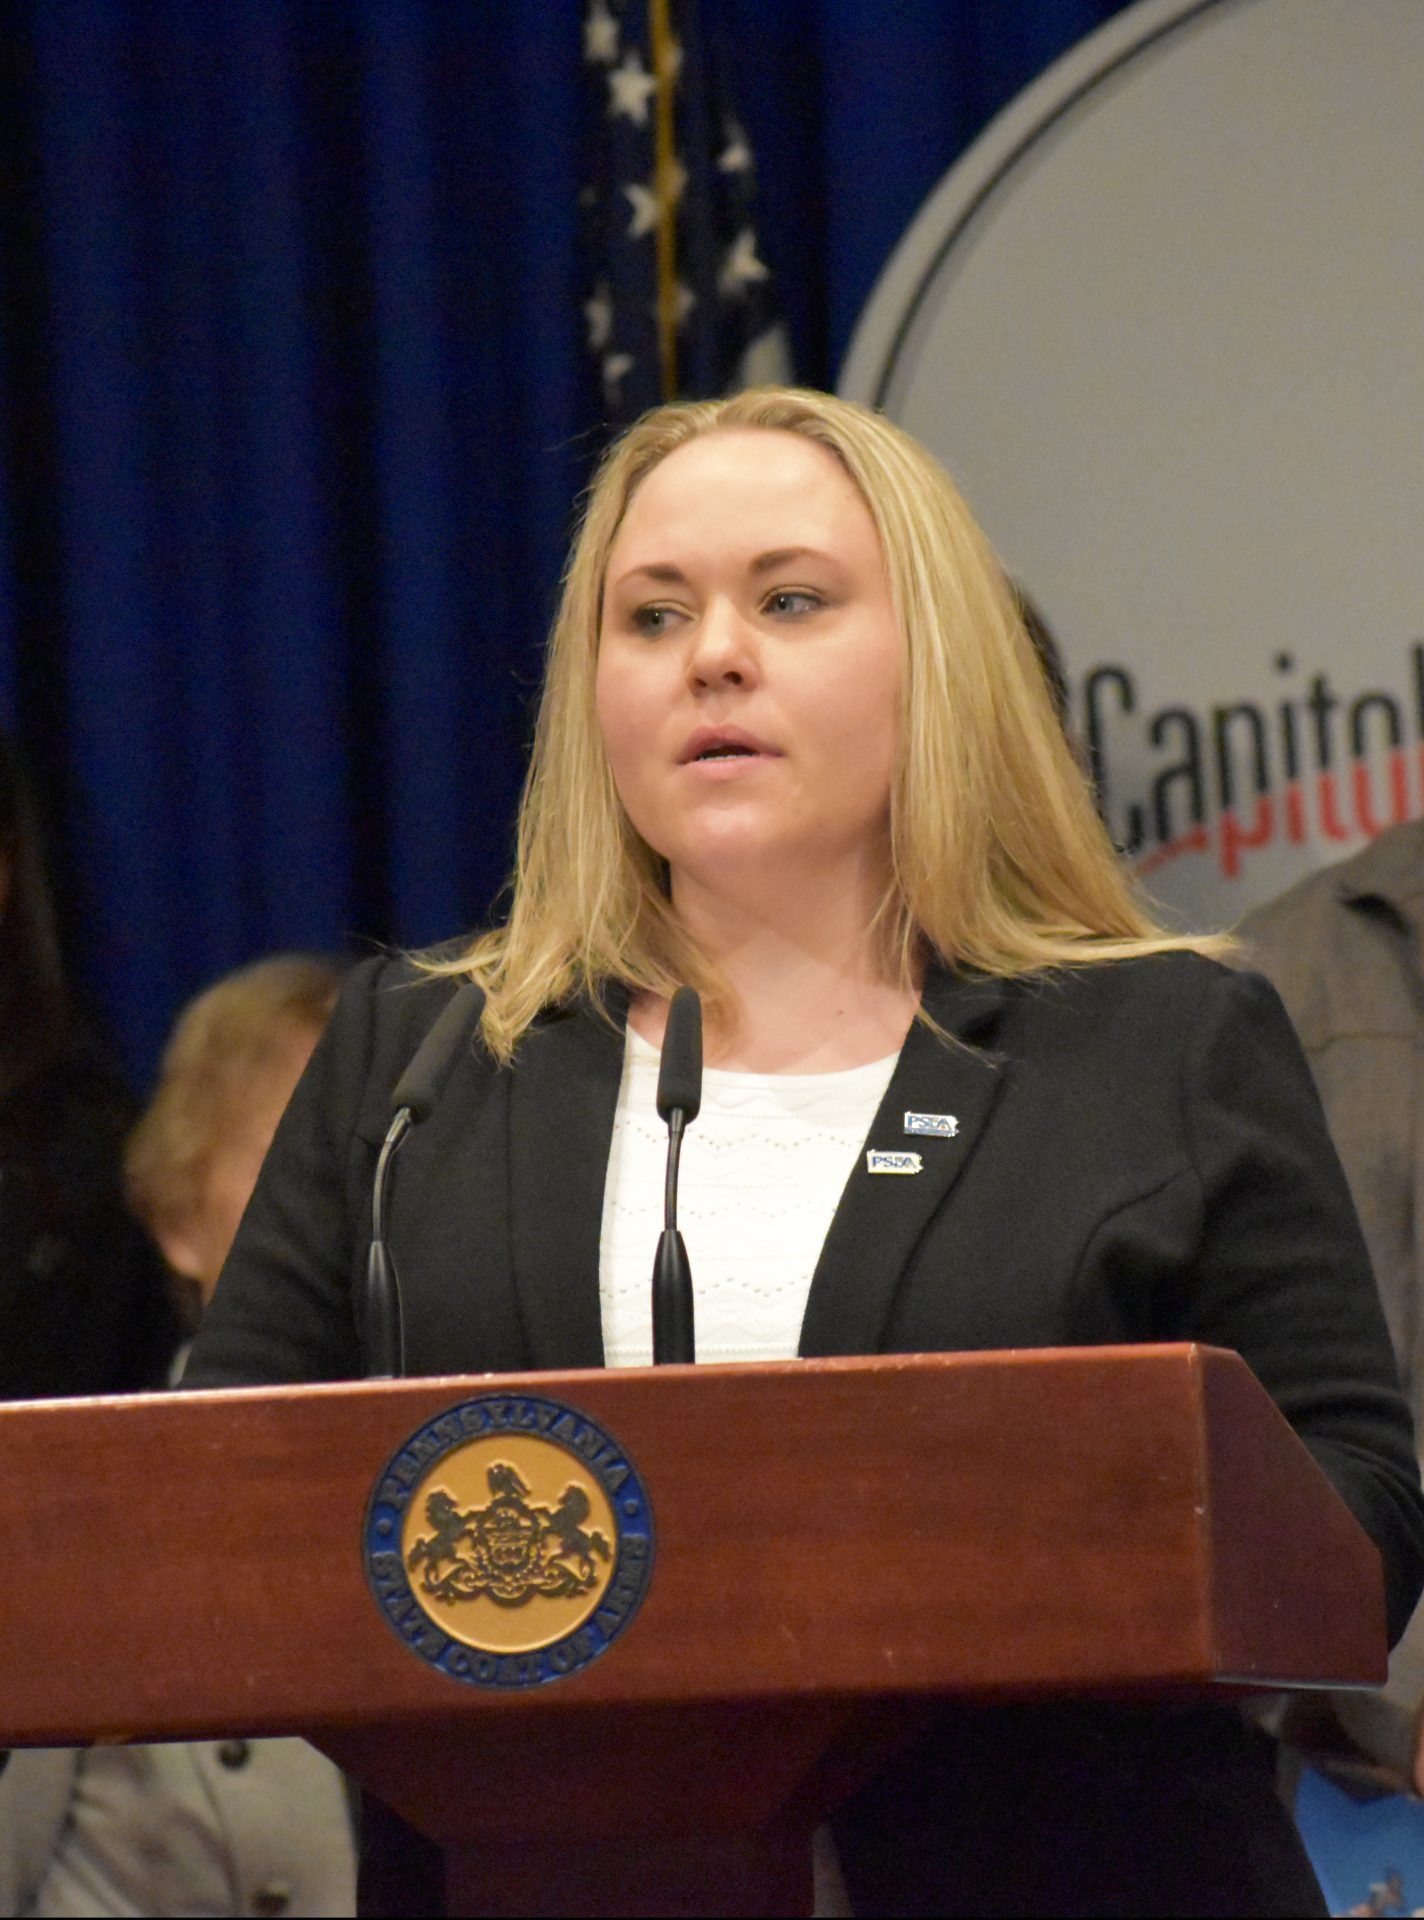 Stacie Baur, a teacher in the Clairton City School District, speaks during a news conference on March 26, 2019.